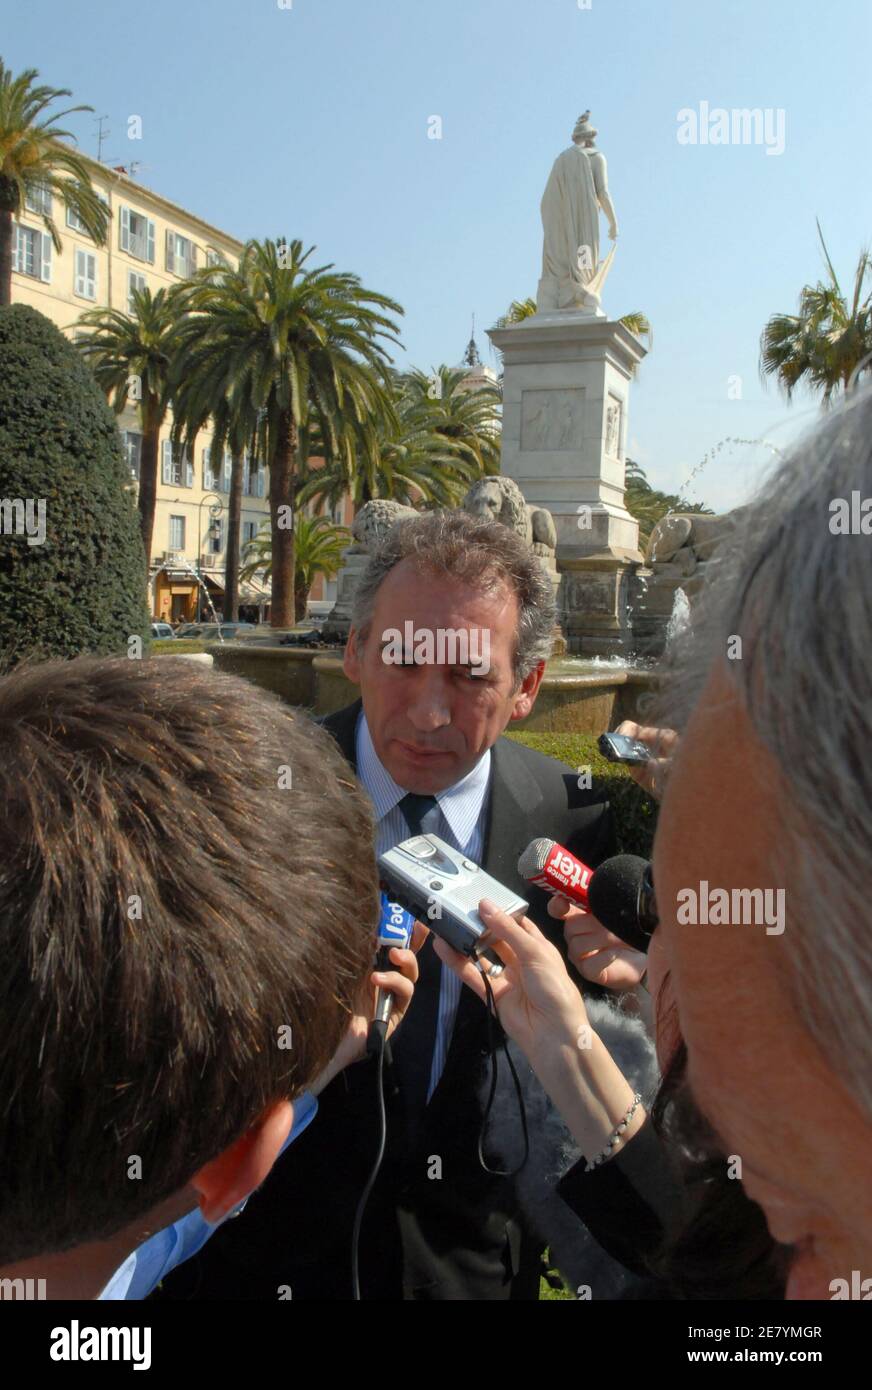 UDF presidential candidate Francois Bayrou campaigns in Ajaccio, Corsica, France on April 7, 2007. Photo by Eric Beber/ABACAPRESS.COM Stock Photo